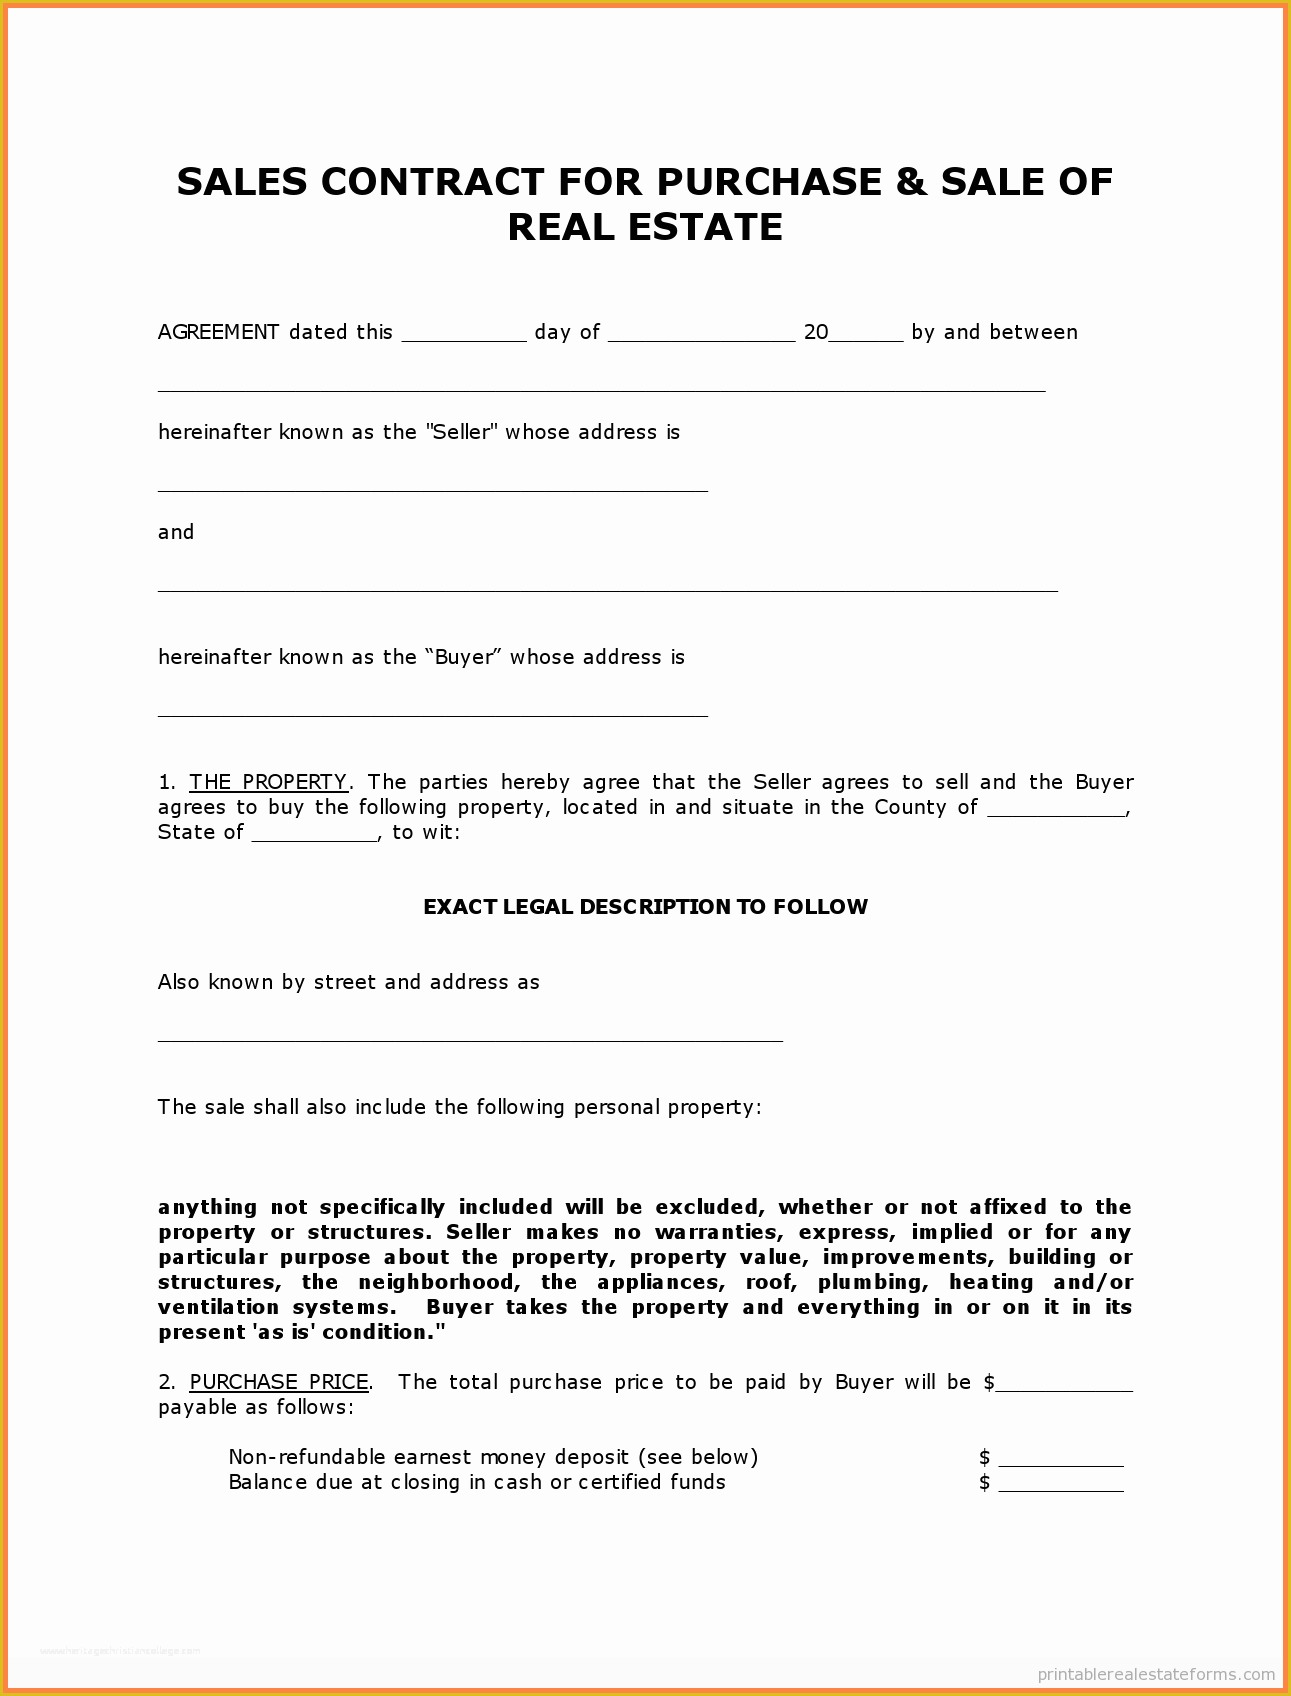 Real Estate Purchase Contract Template Free Of 4 for Sale by Owner Purchase Agreement form